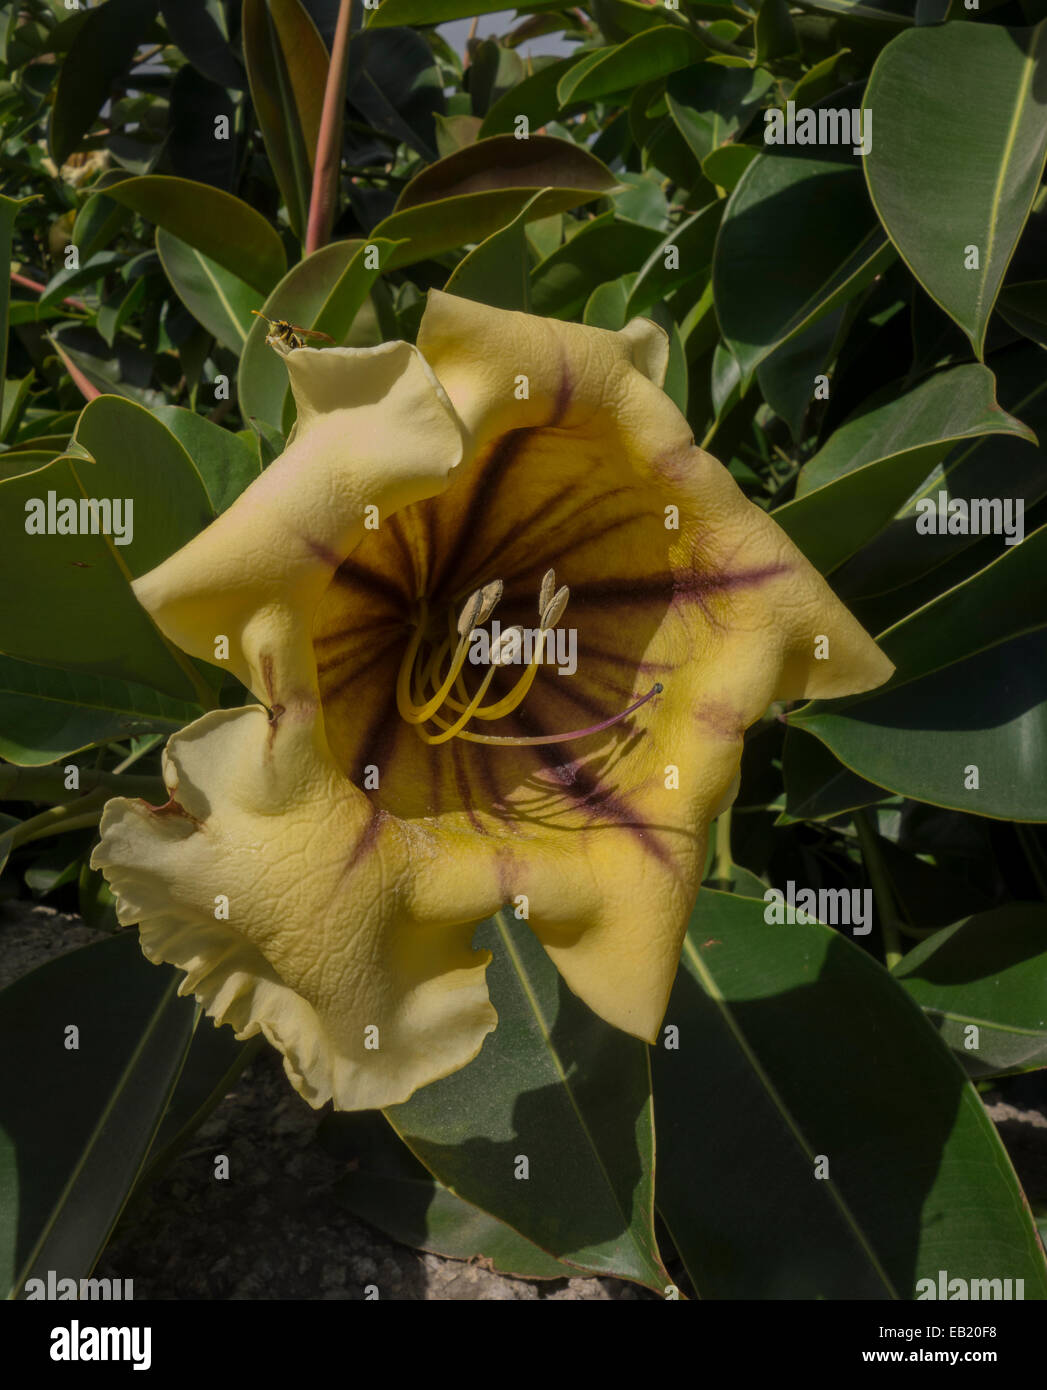 Solandra maxima, generally known as Cup of Gold Vine, Golden Chalice Vine, or Hawaiian Lily. This picture was taken in Malta. Stock Photo